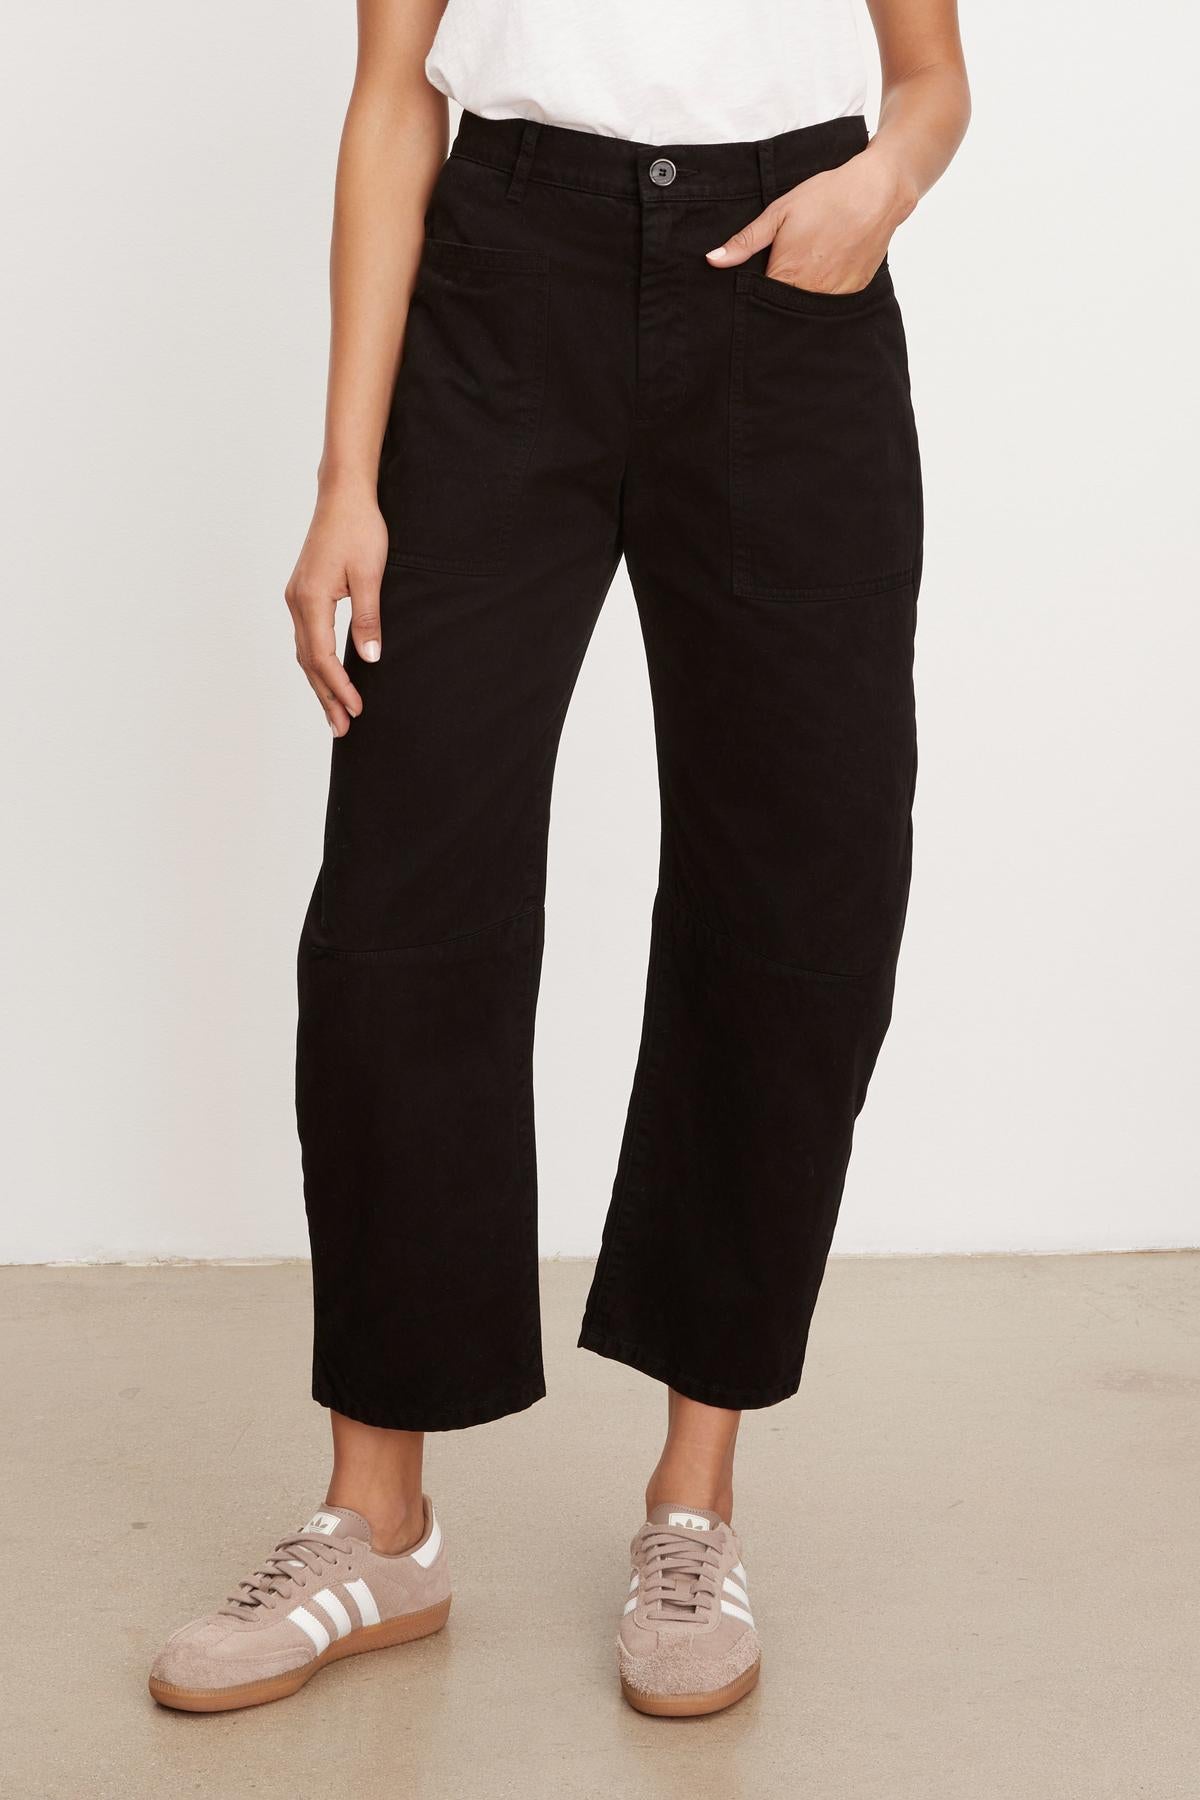 A woman wearing Velvet by Graham & Spencer's BRYLIE SANDED TWILL UTILITY PANT with patch pockets and a white t-shirt.-36040341913793